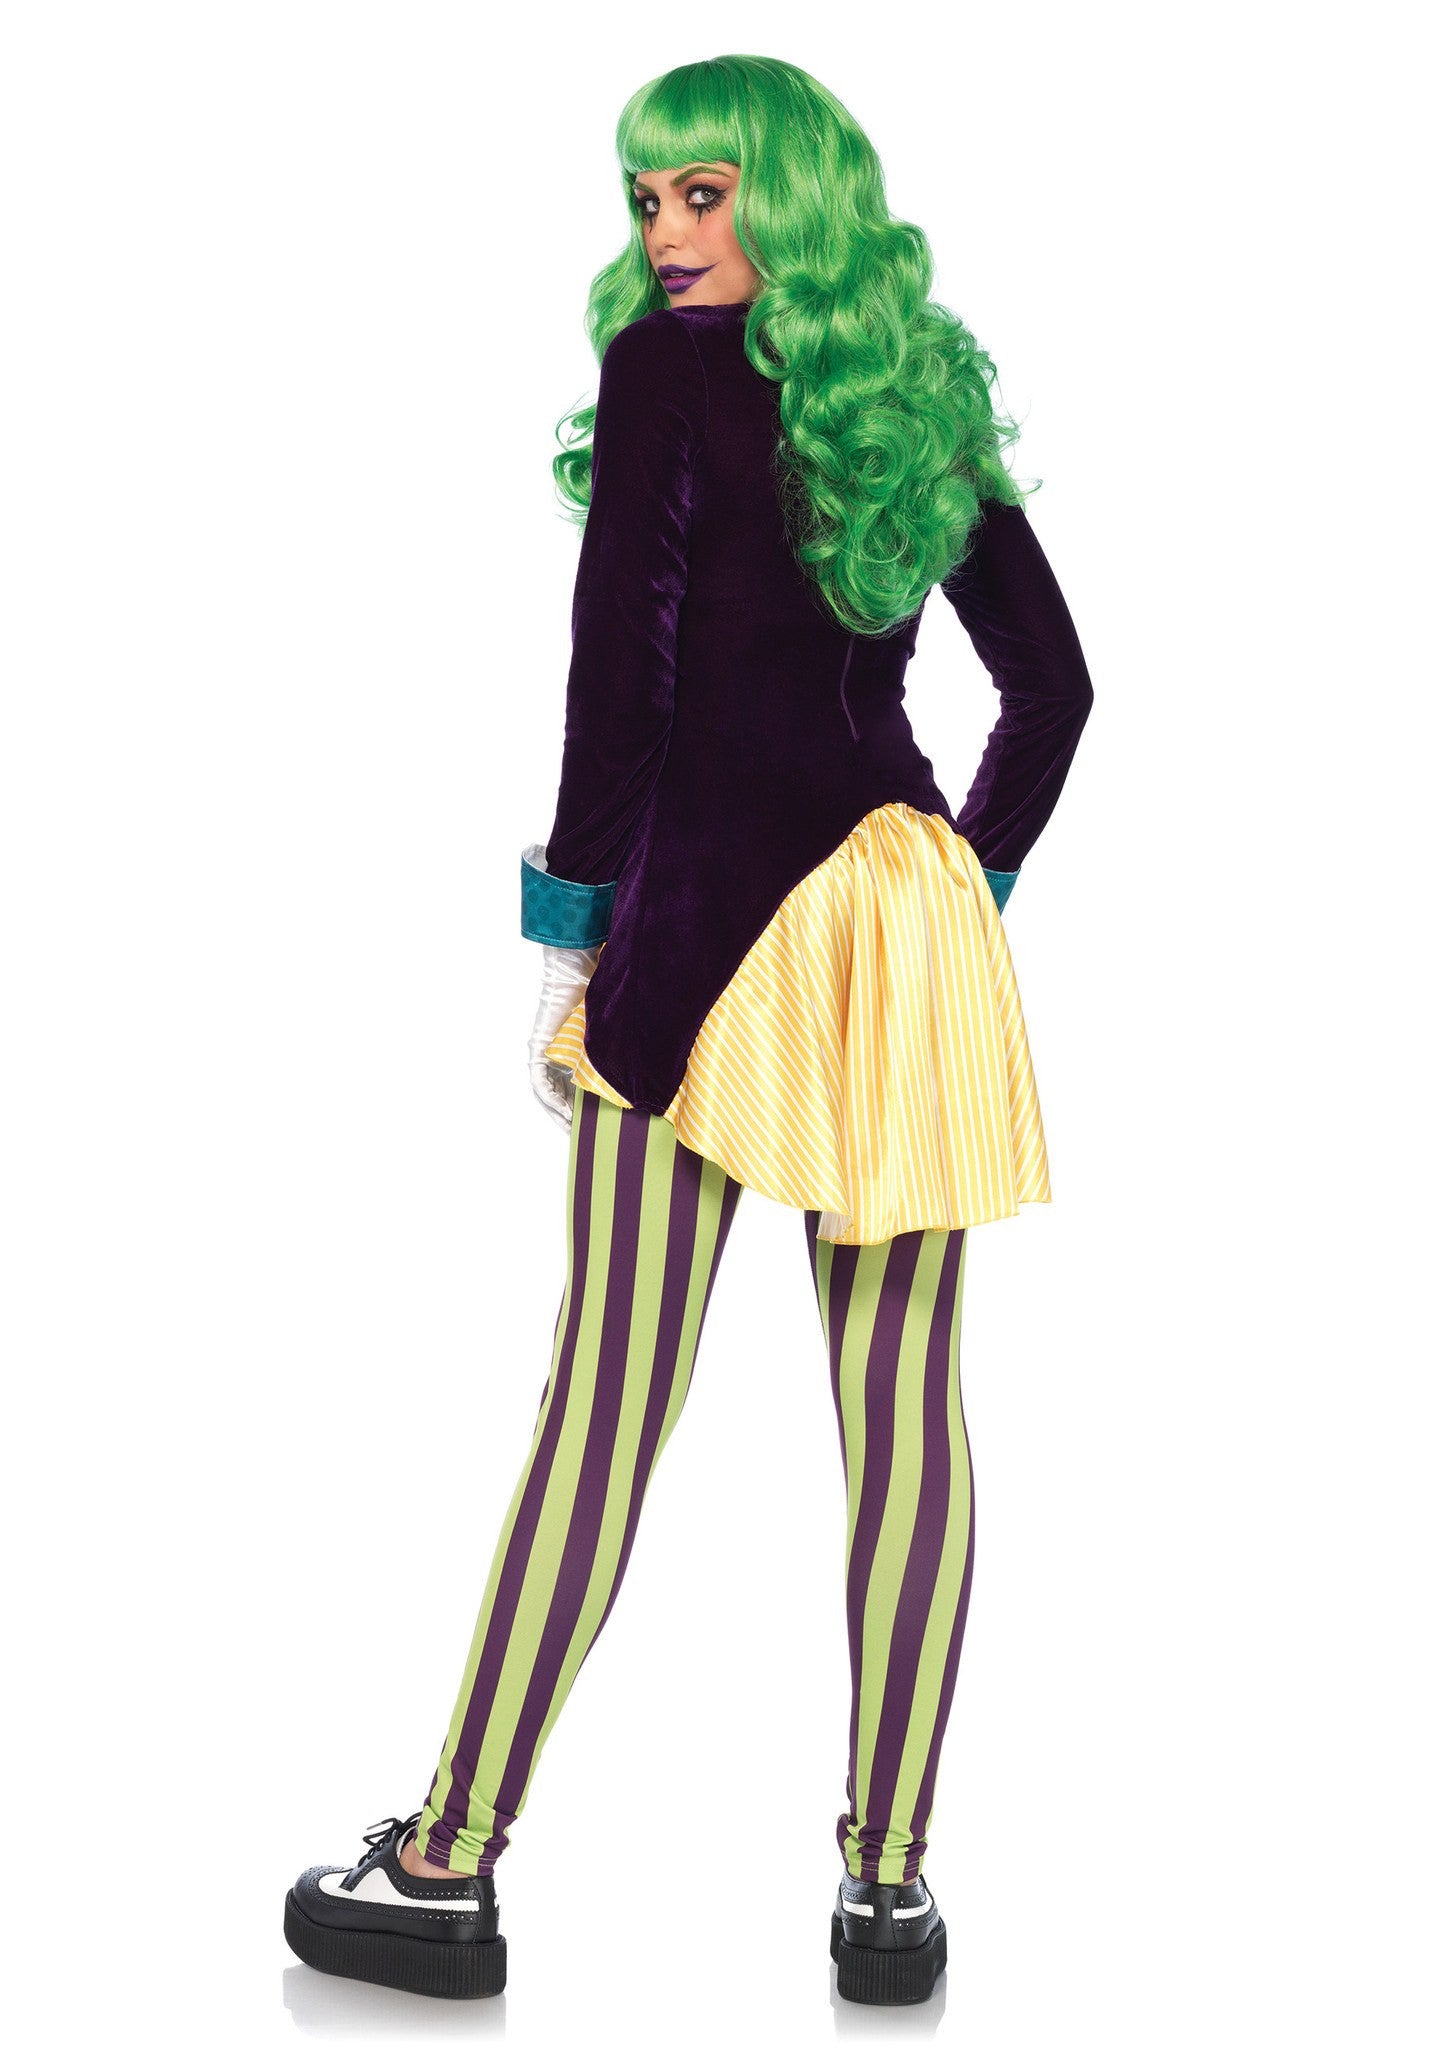 Costume - Wicked Trickster Costume